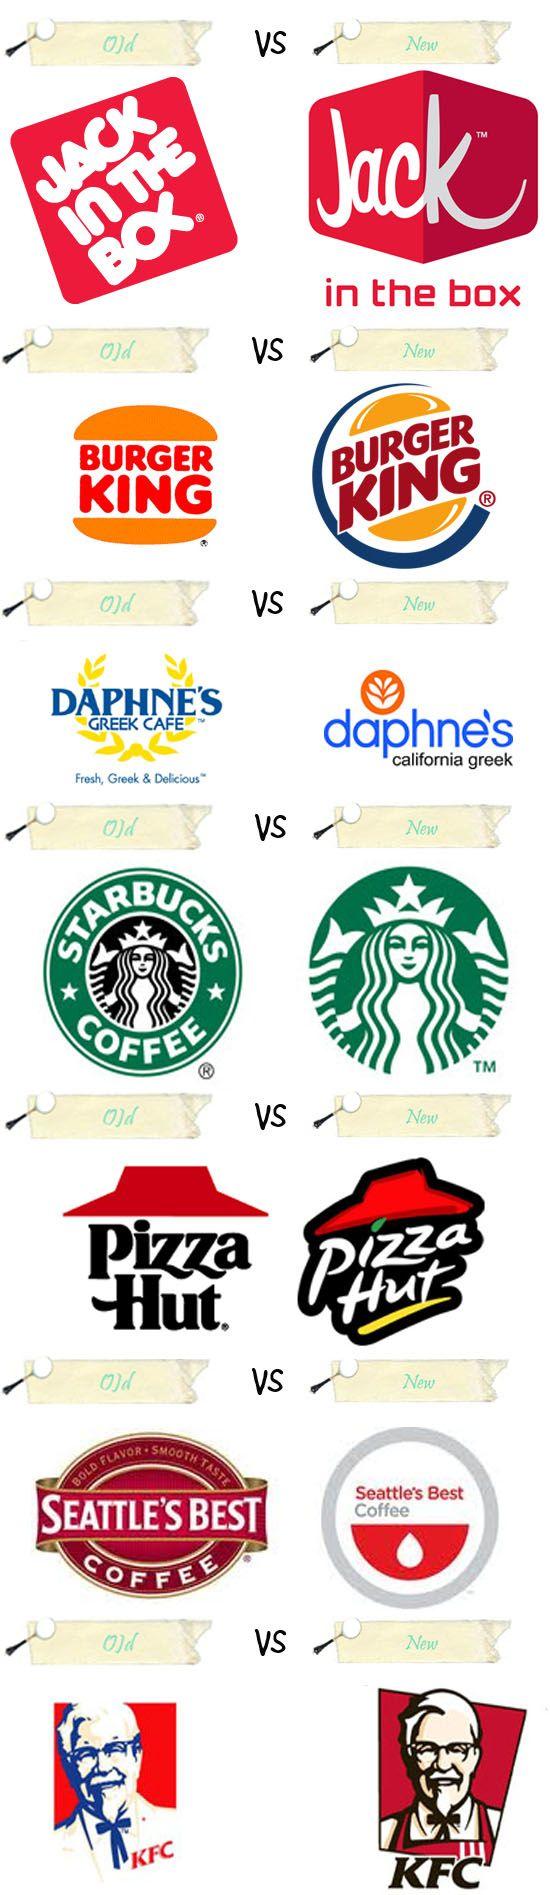 Popular Food Chains Logo - Fast Food Chains old vs new logos